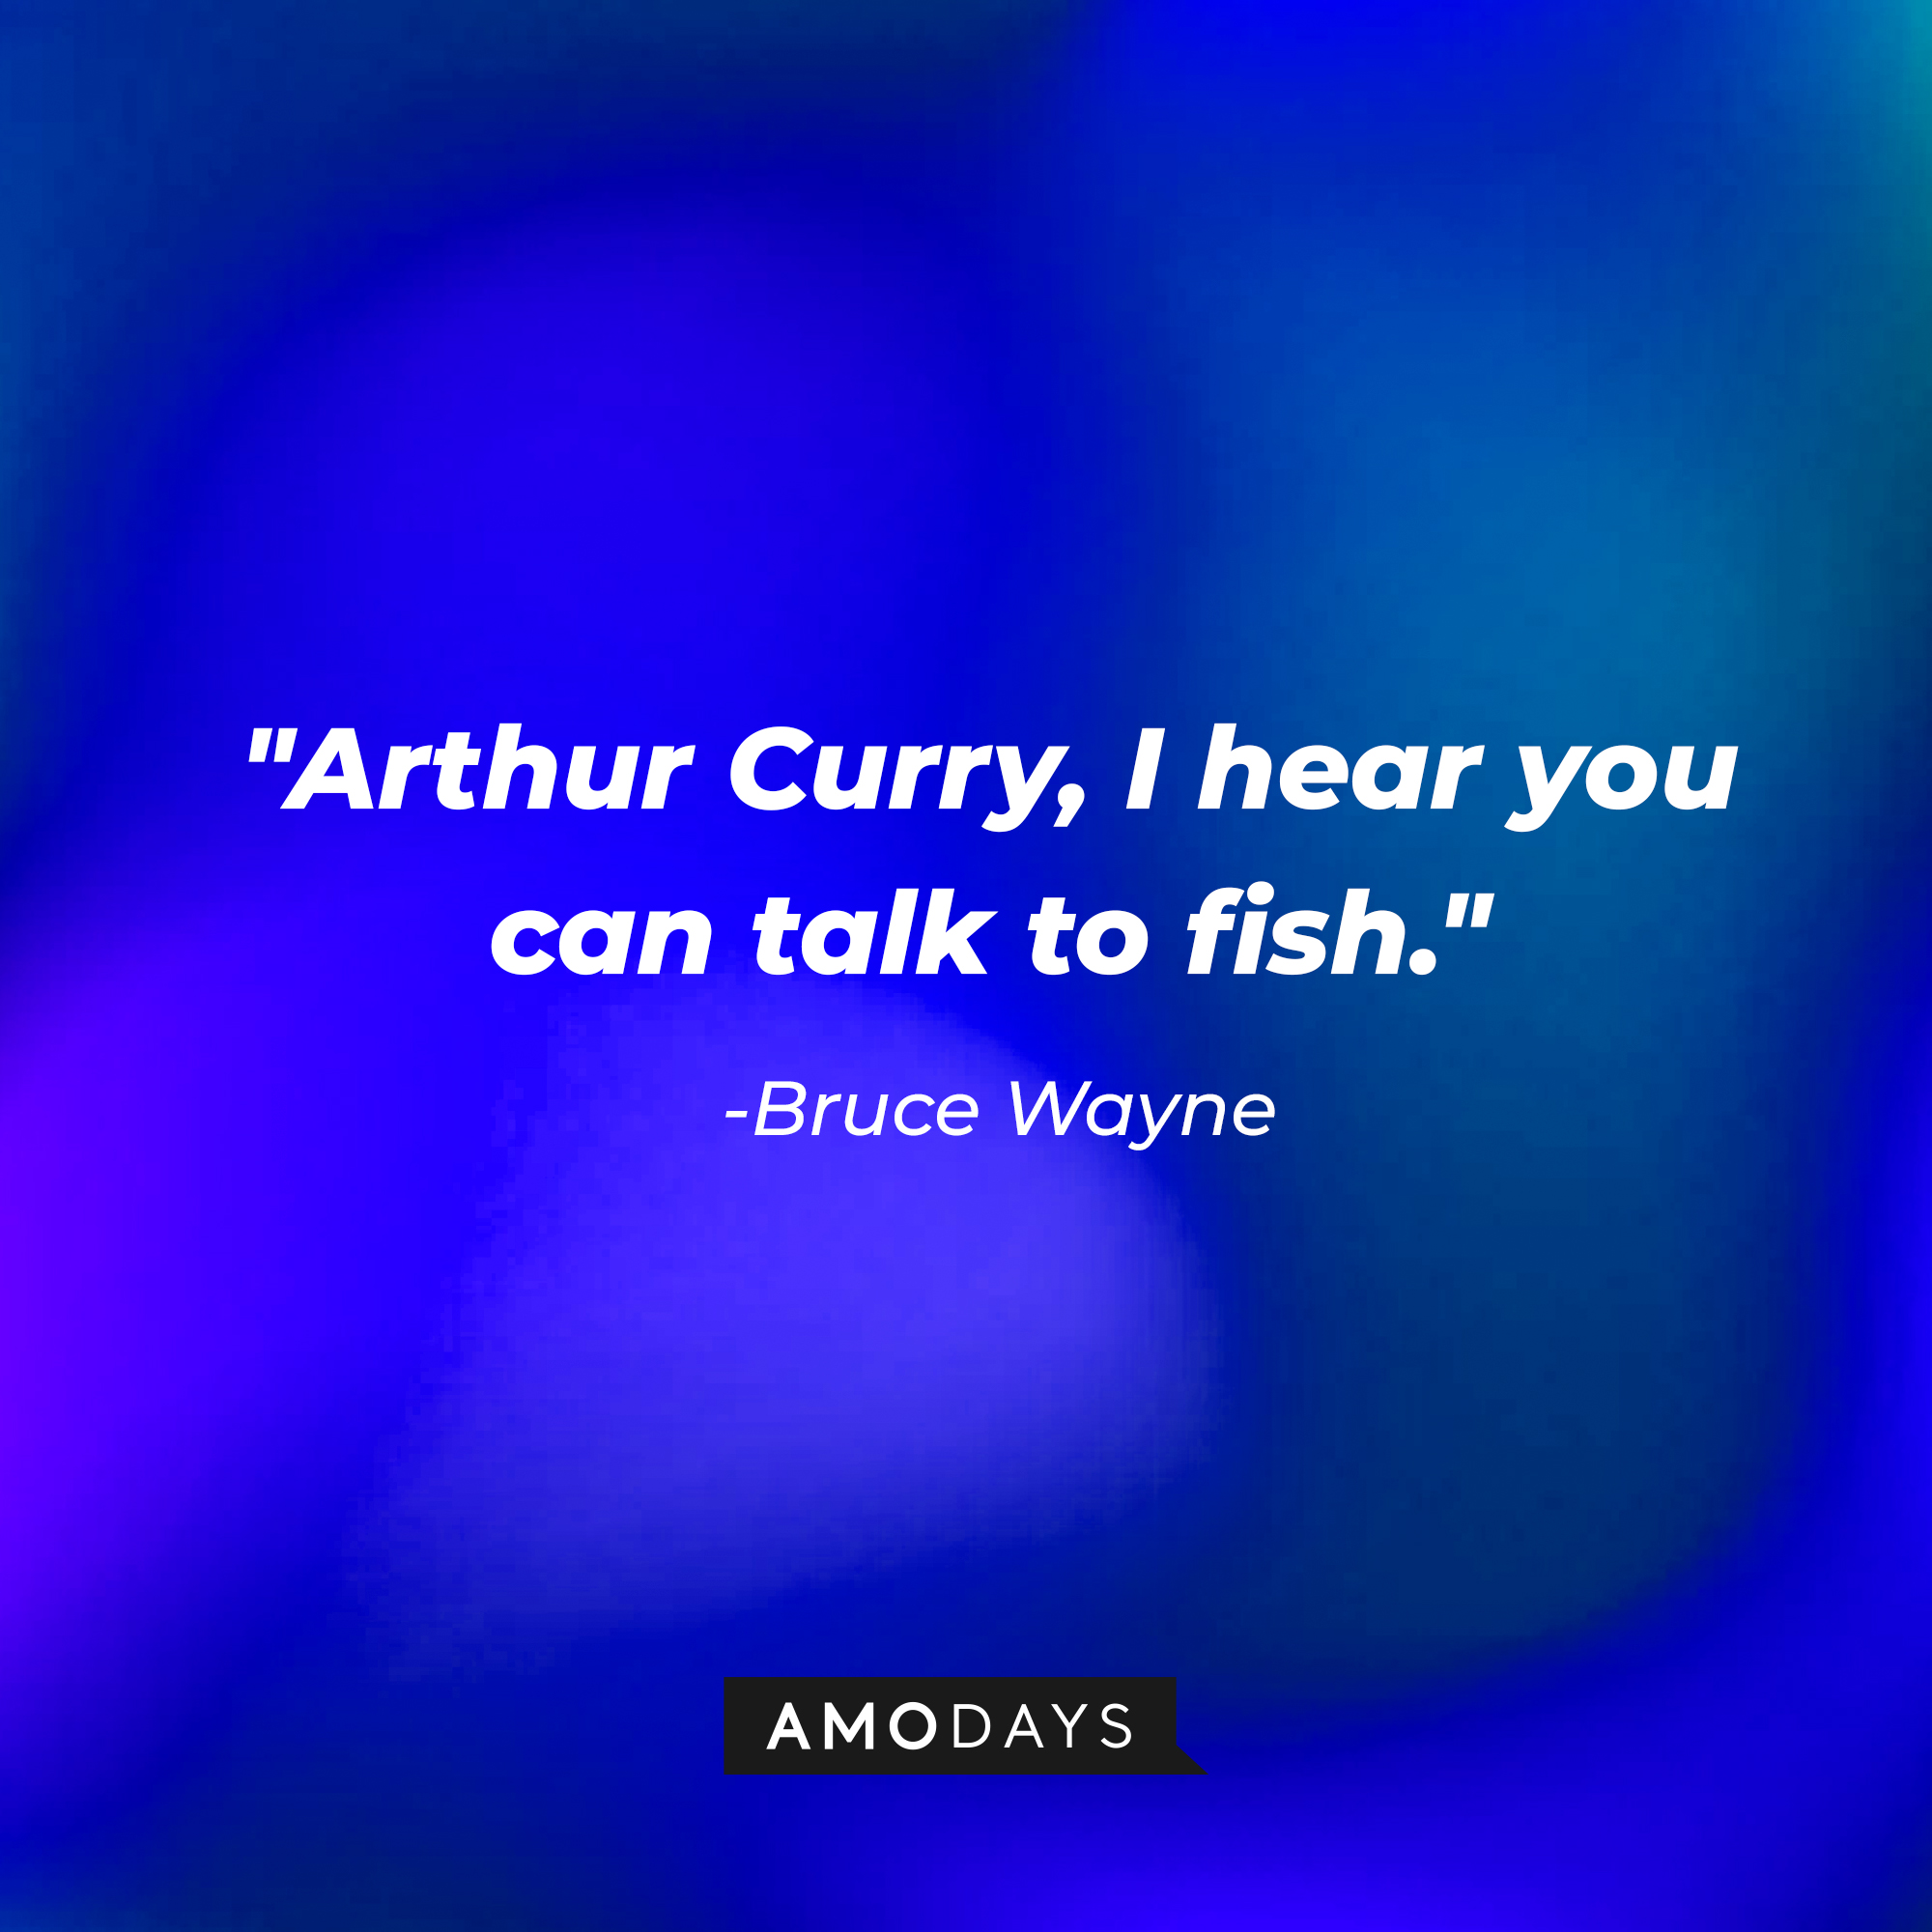 Bruce Wayne's quote, "Arthur Curry, I hear you can talk to fish." | Source: AmoDays